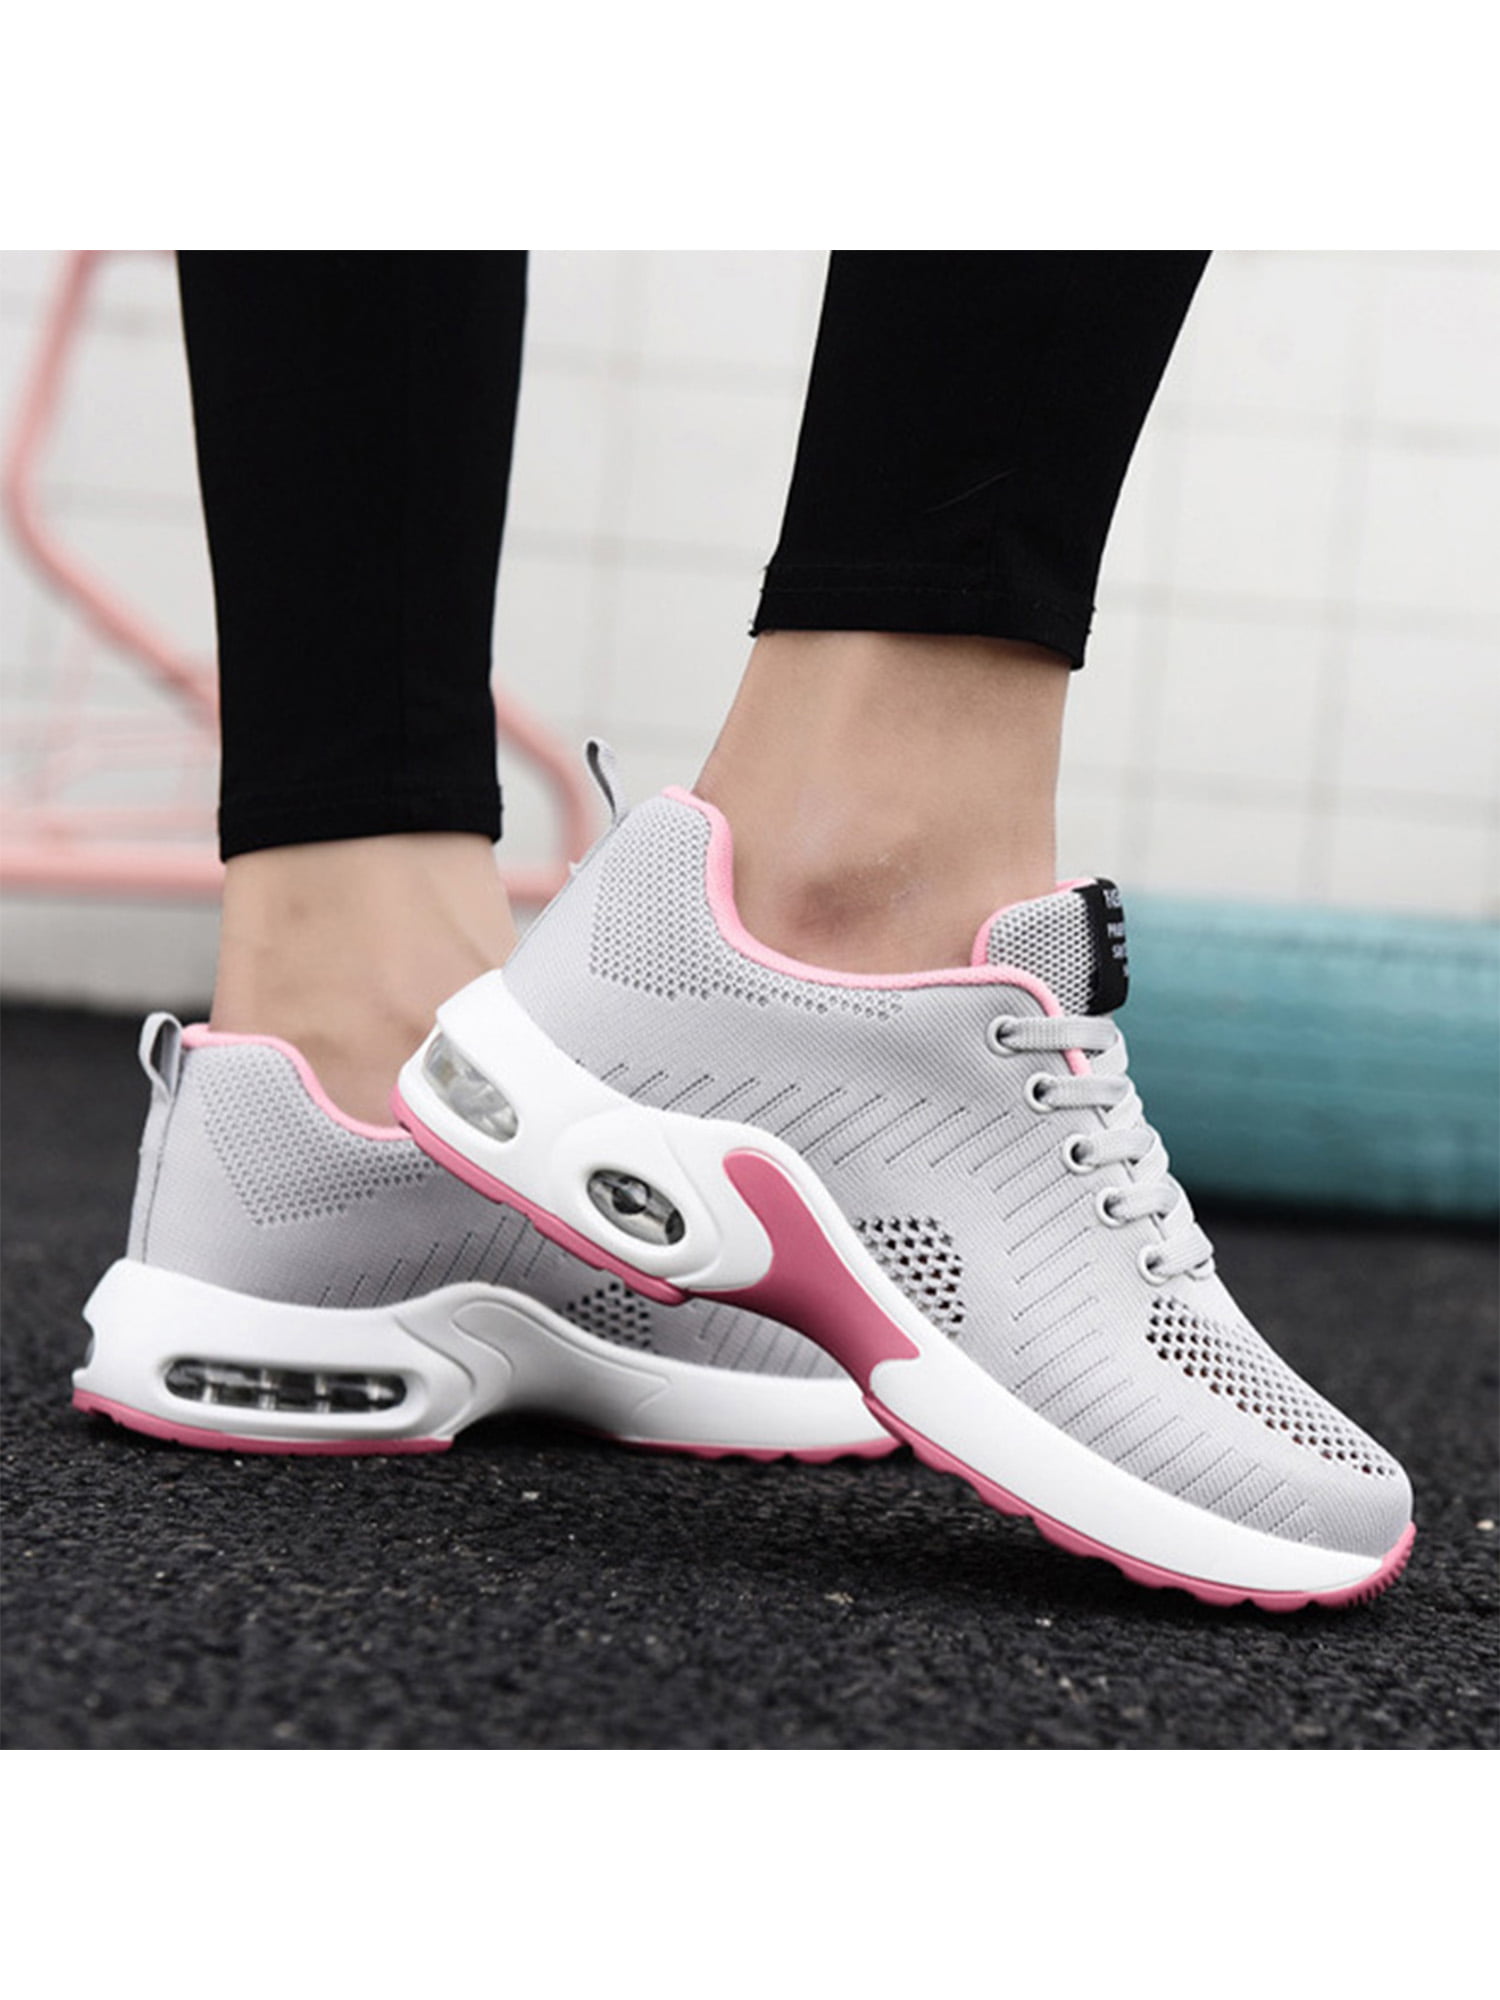 Womens Non Slip Running Shoes Athletic Tennis Sneakers Sports Walking Shoes 